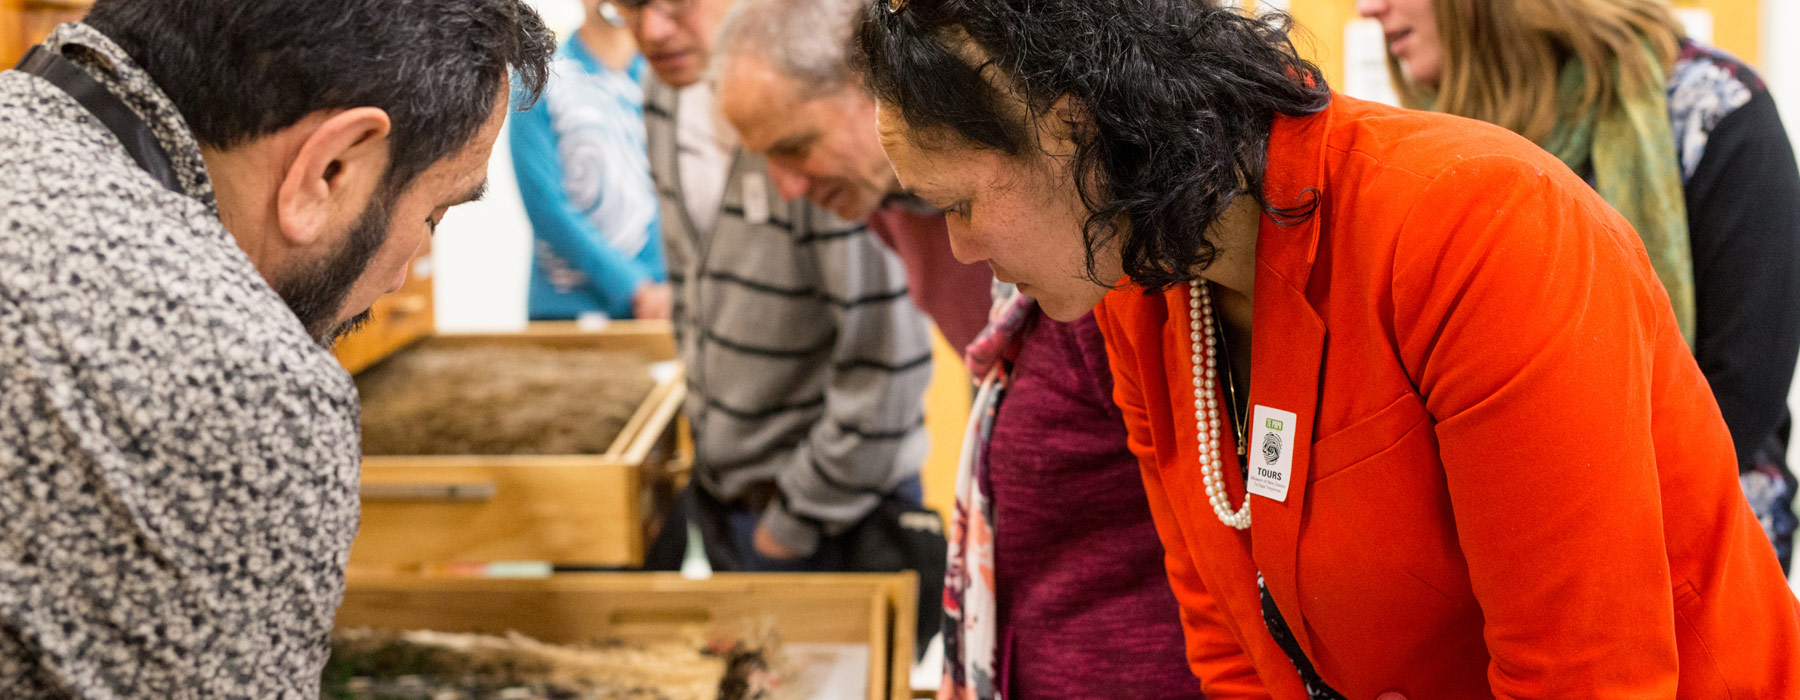 Cable Street Open Day, 2015. Photographed by Michael Hall, ©Te Papa